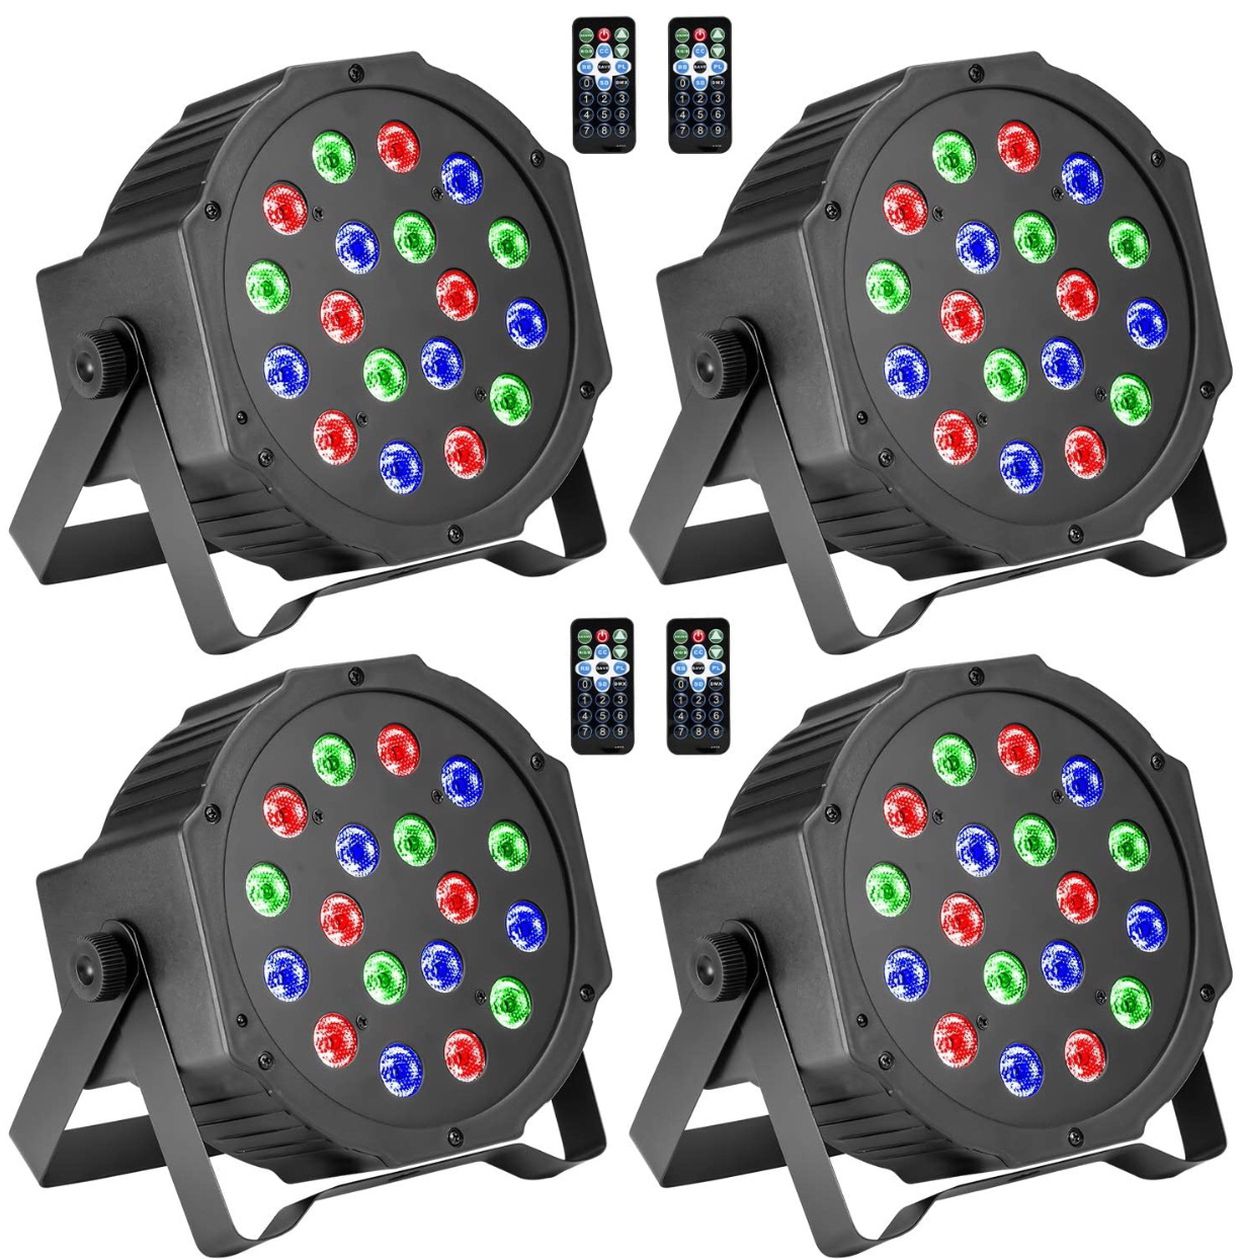 DJ Lights, BSYUN RGB 18 LEDs Professional Sound Activated Stage Lights DMX-512 Controllable Uplighting for Wedding Party with Remote (4P)